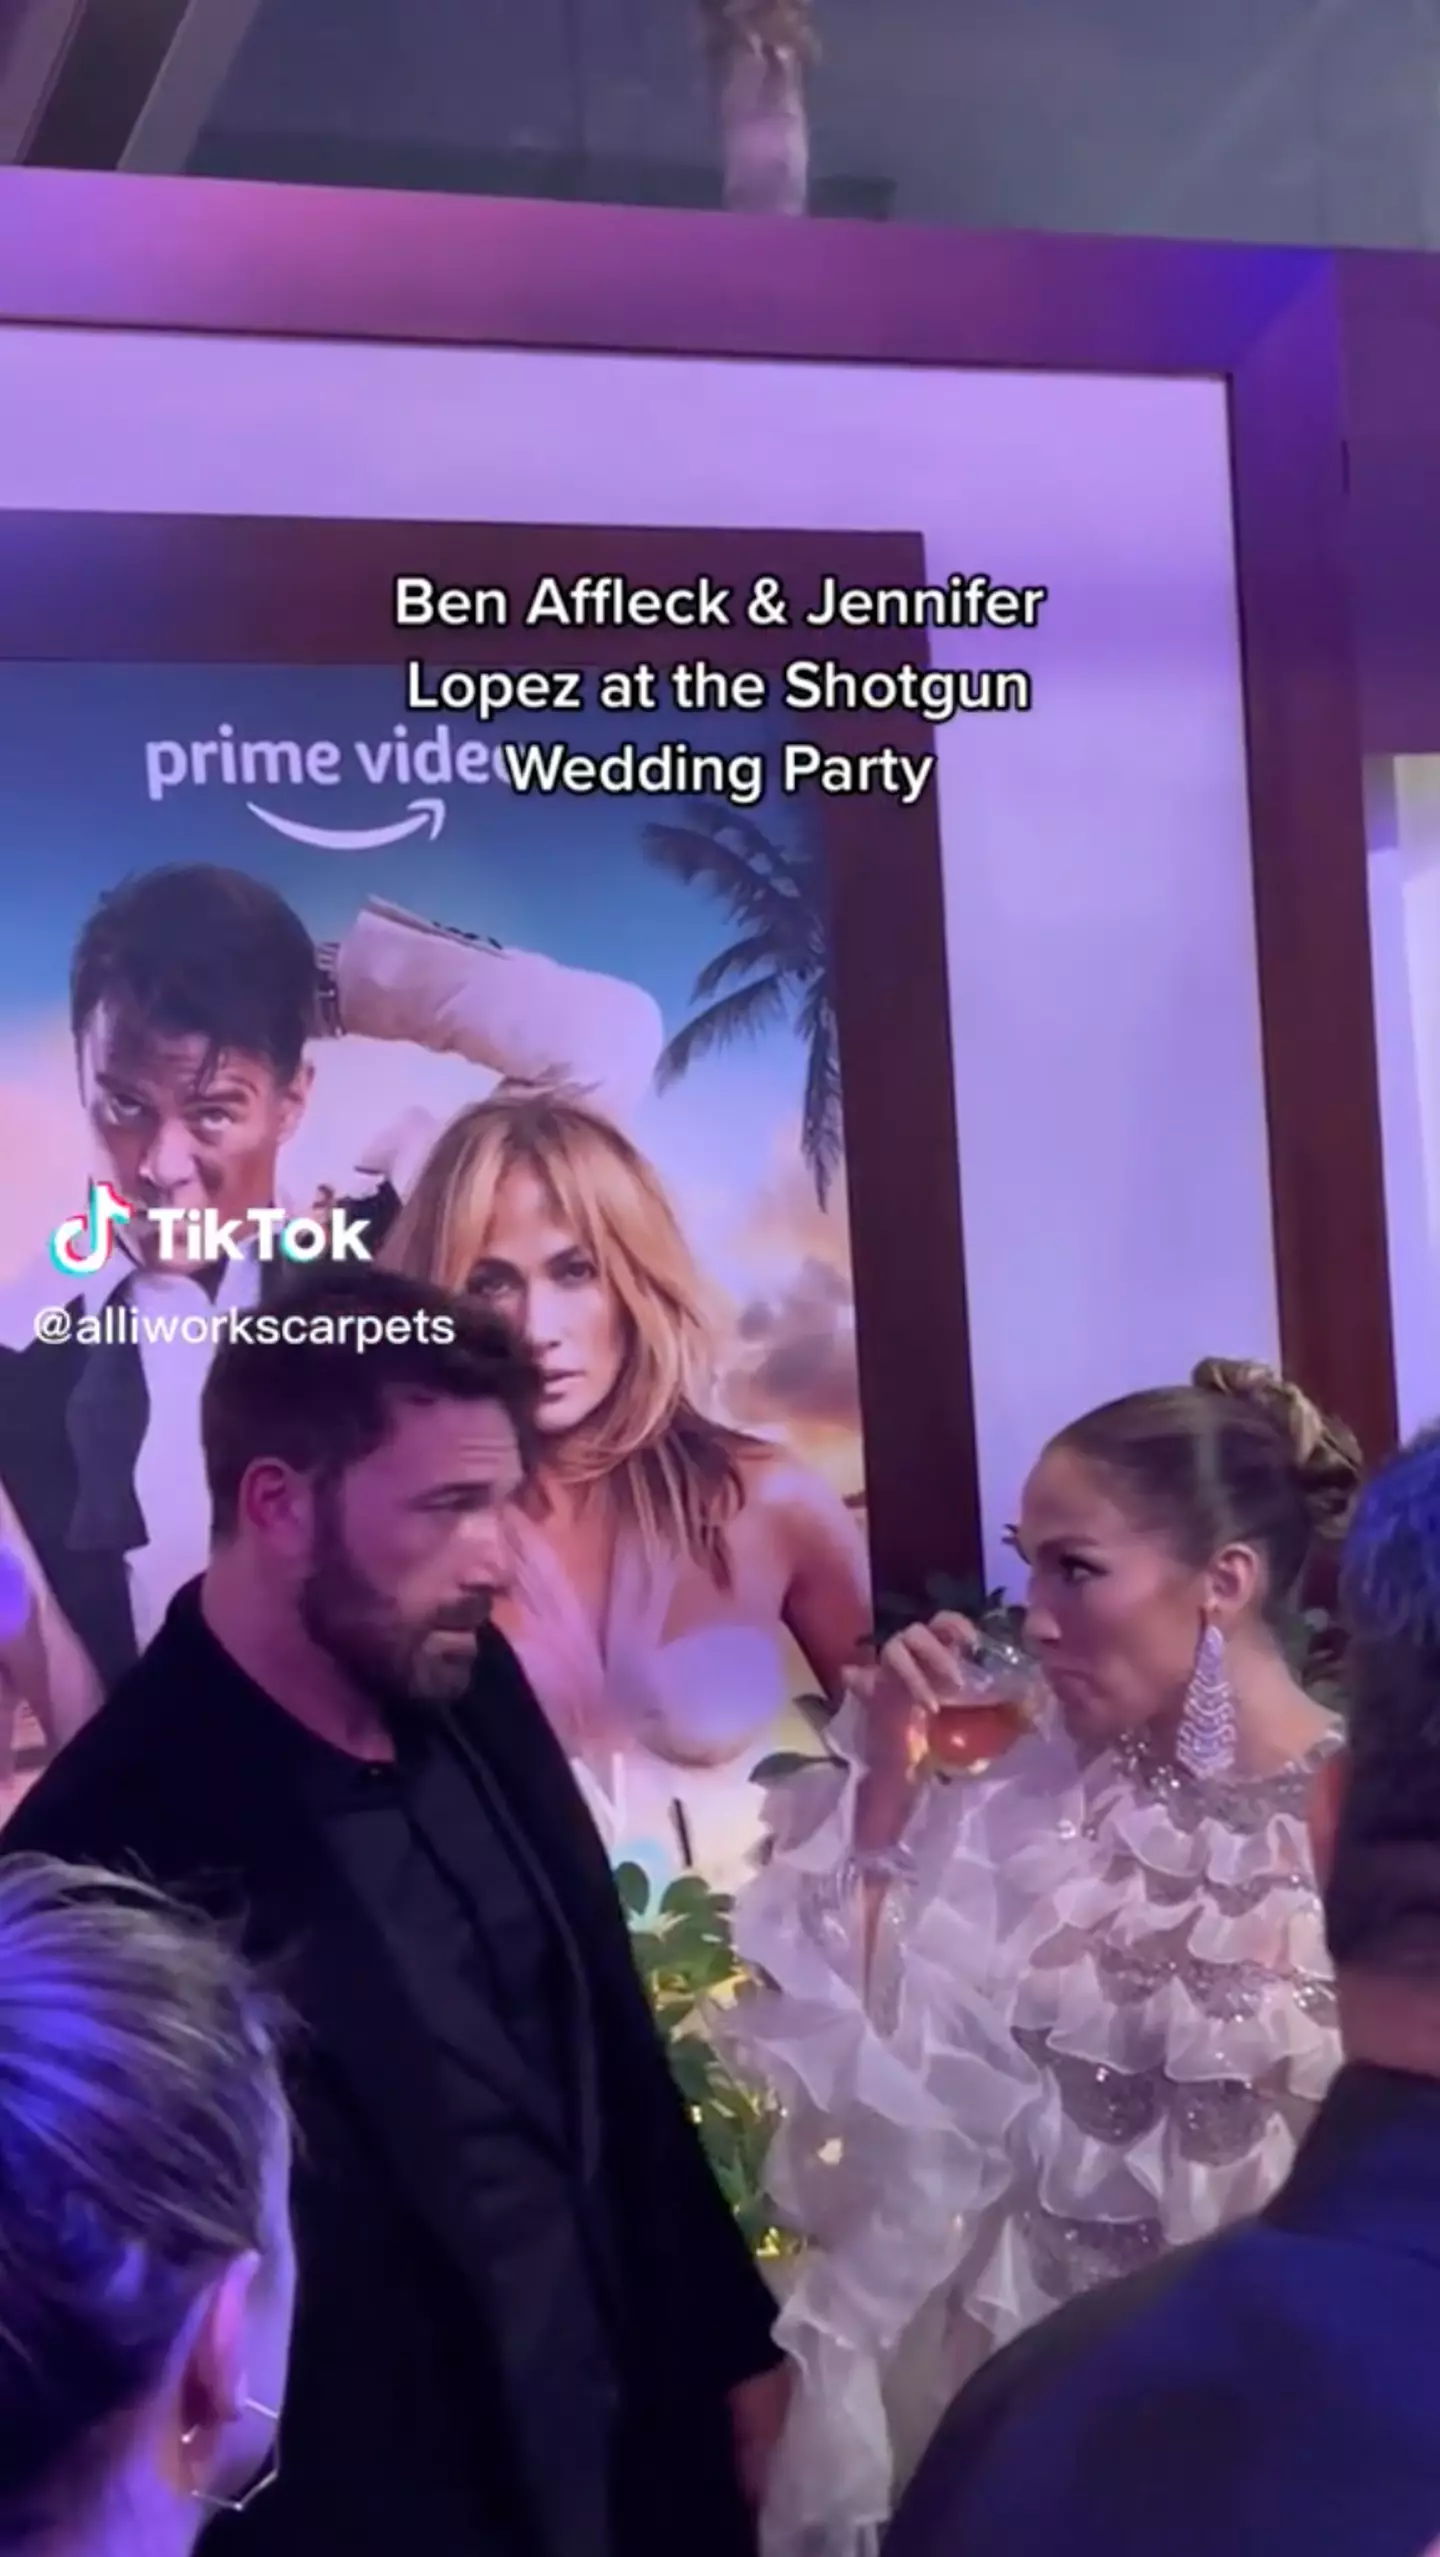 Jennifer and Ben were spotted at the event.